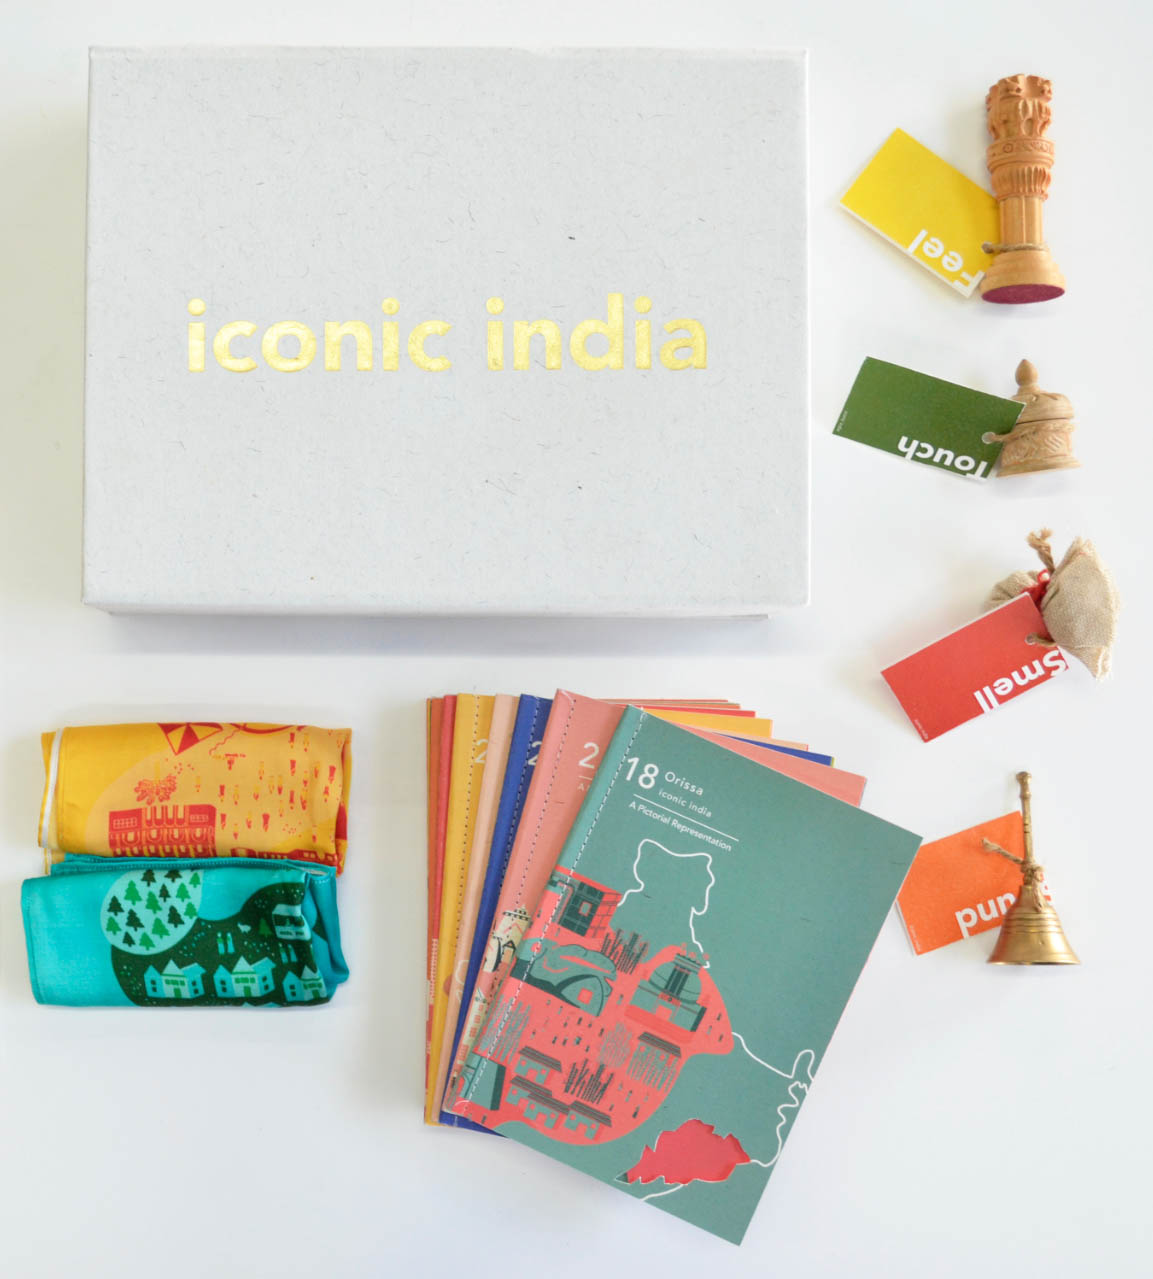 Iconic India a multi-sensorial experience